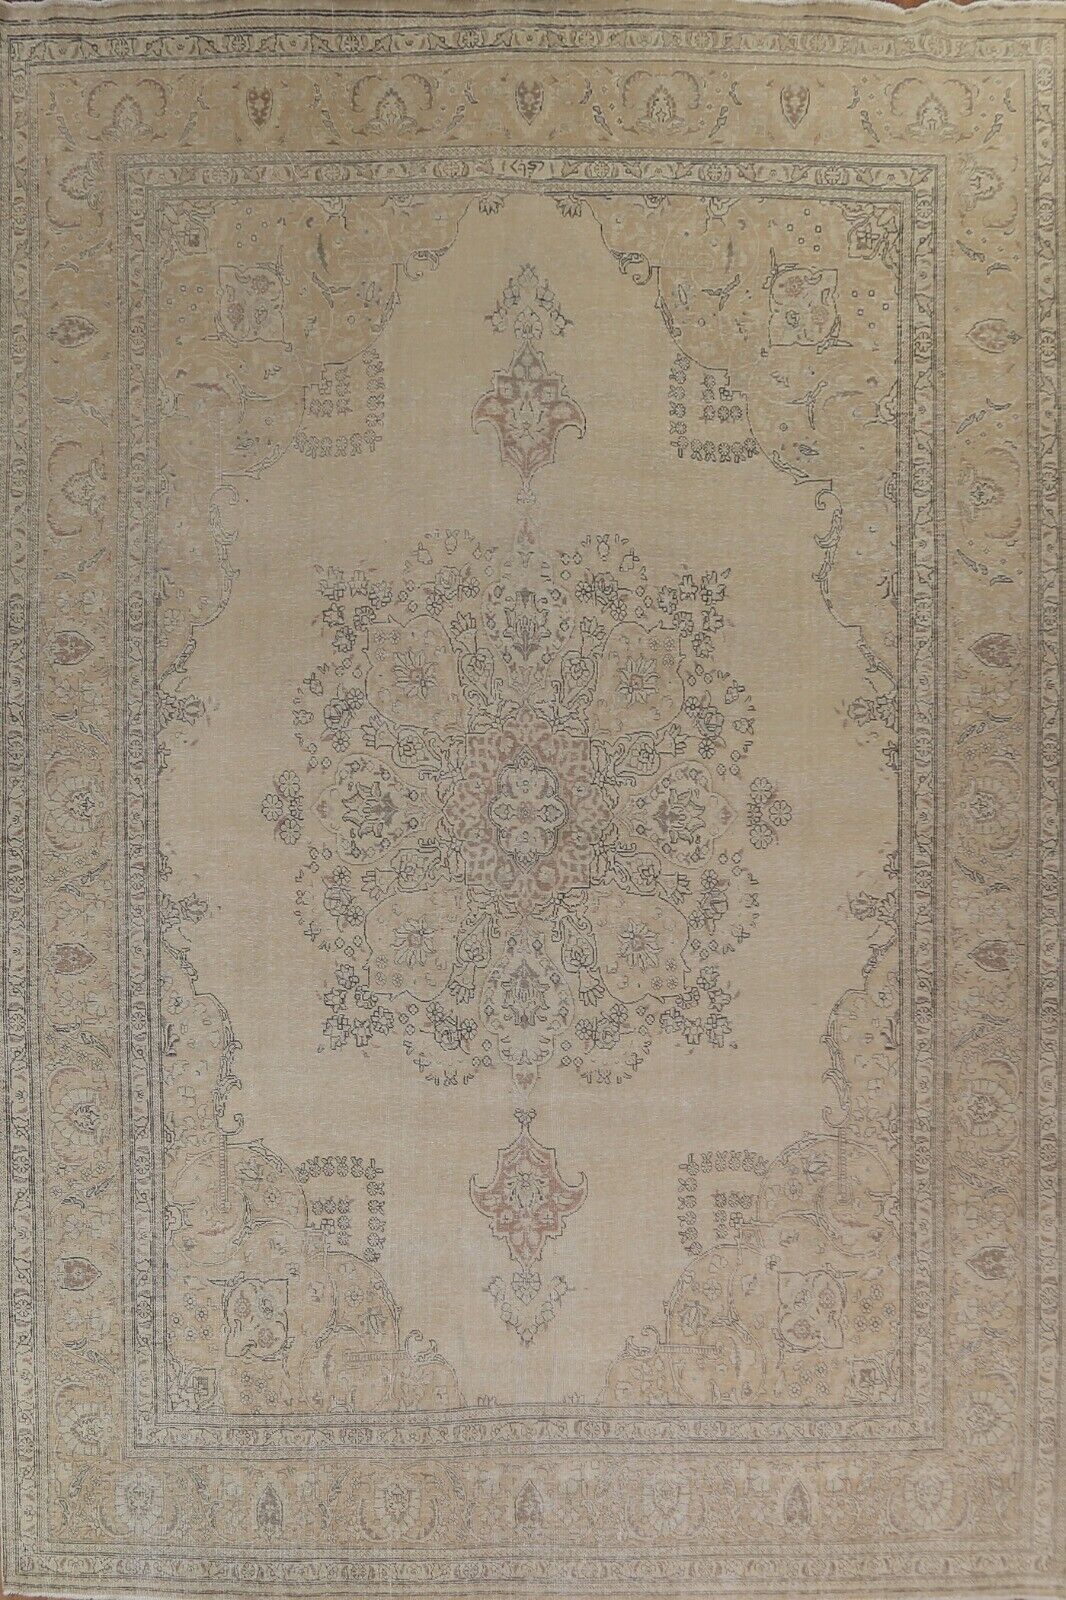 Muted Semi-Antique Floral Traditional 11x15 Area Rug Evenly Low Pile Handmade